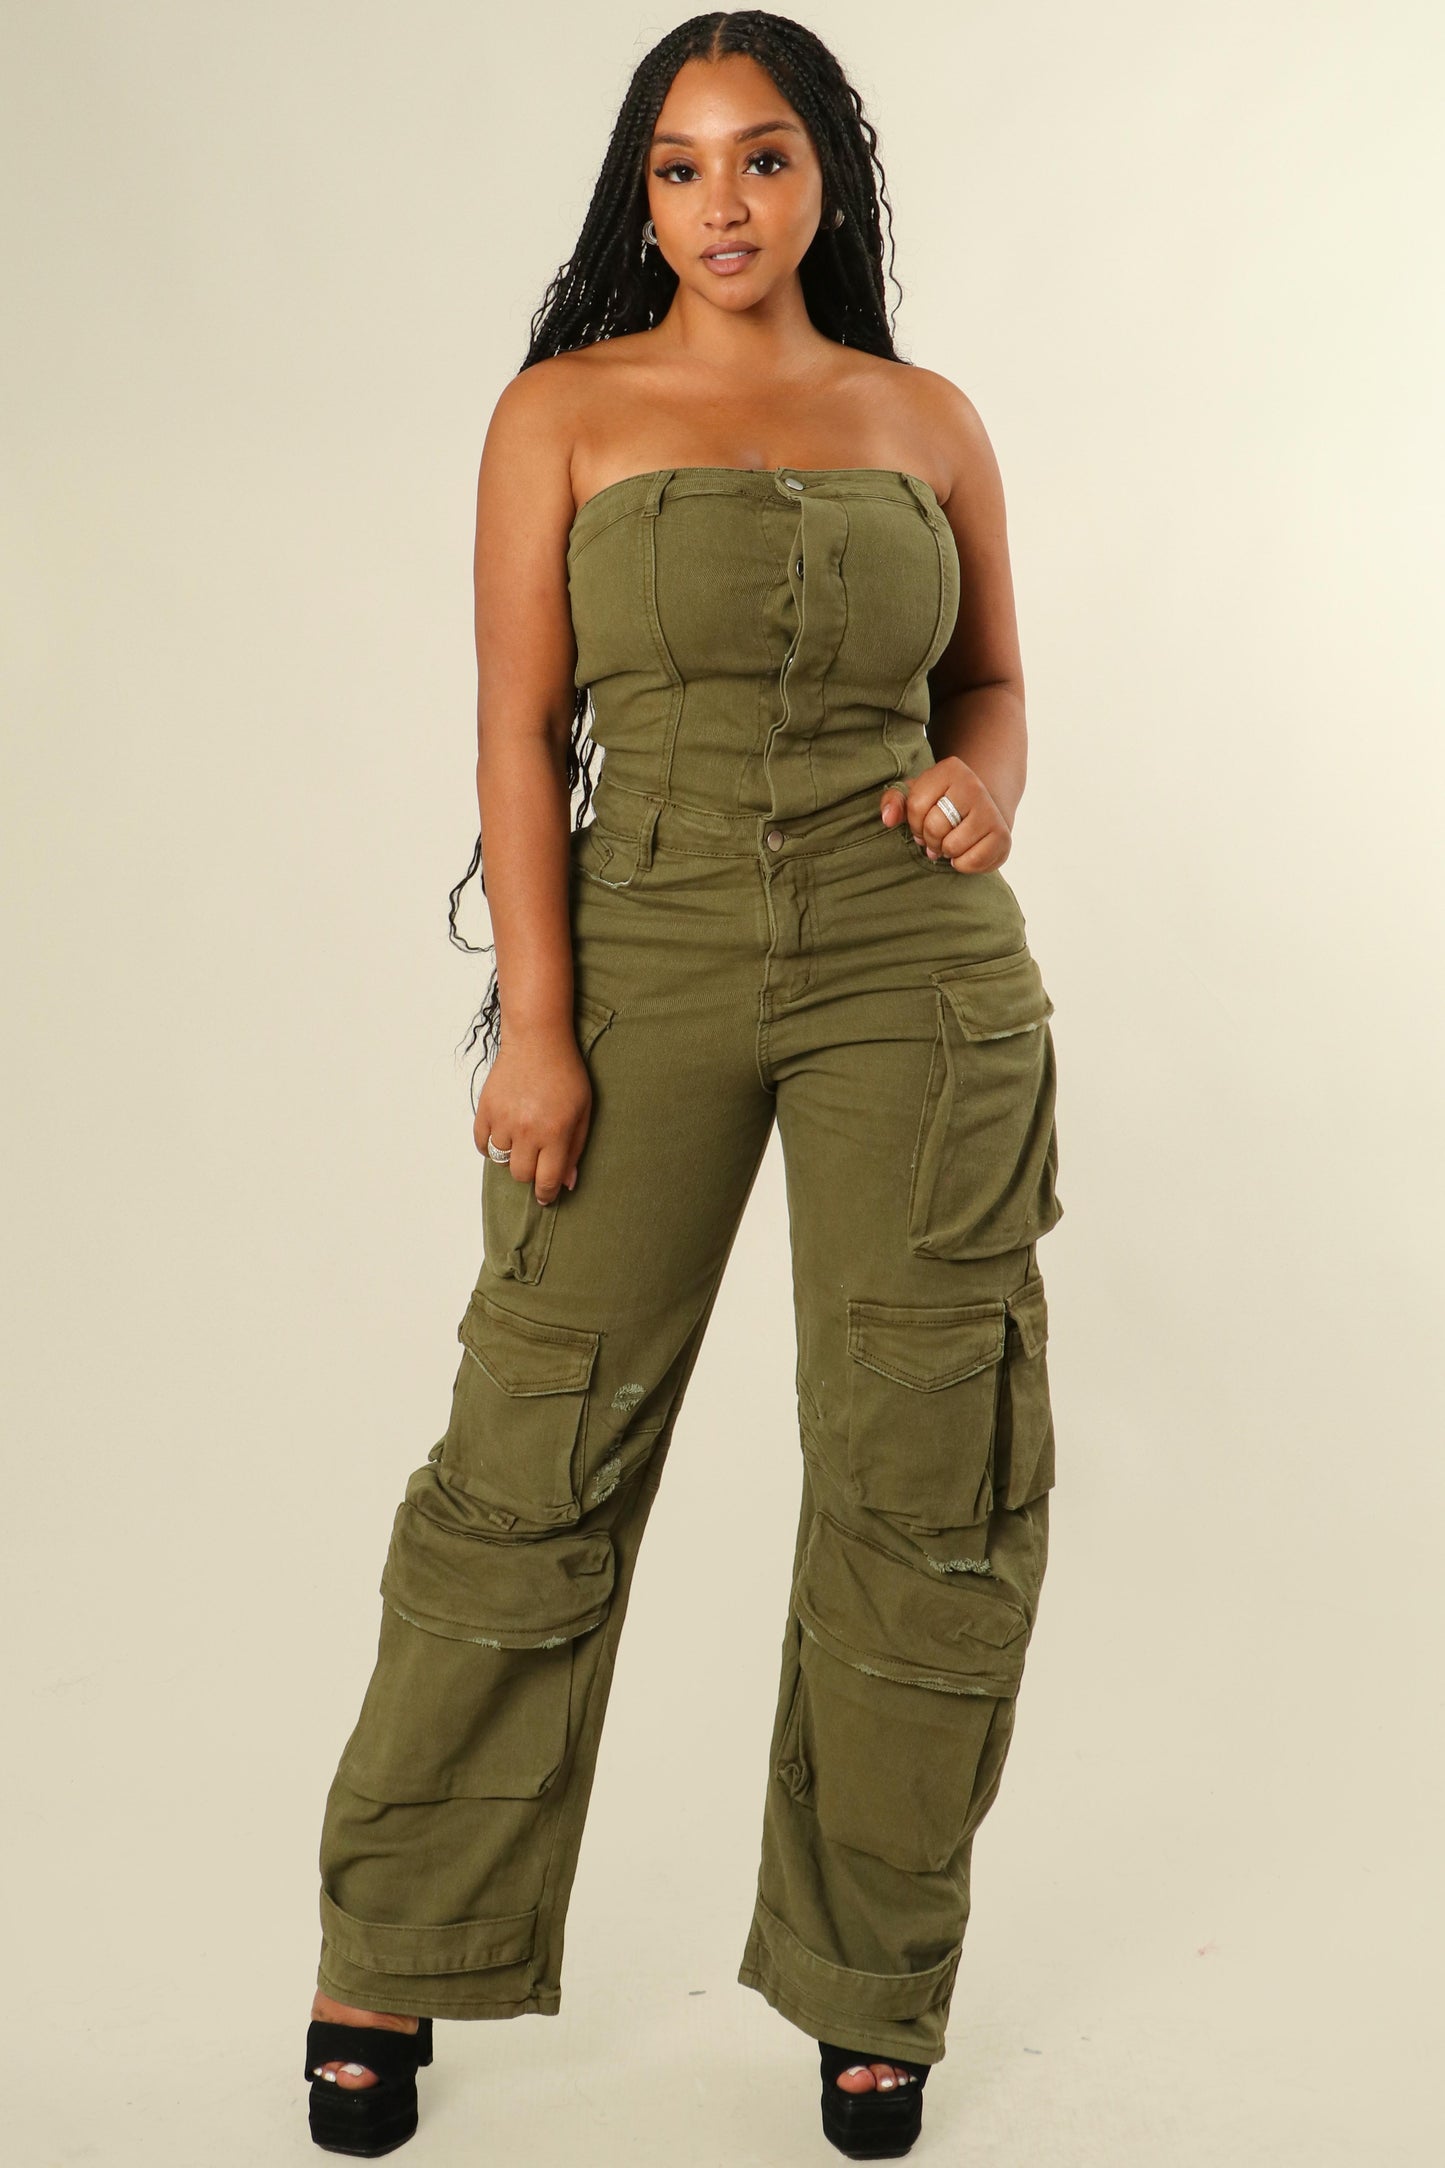 New Phase Jumpsuit